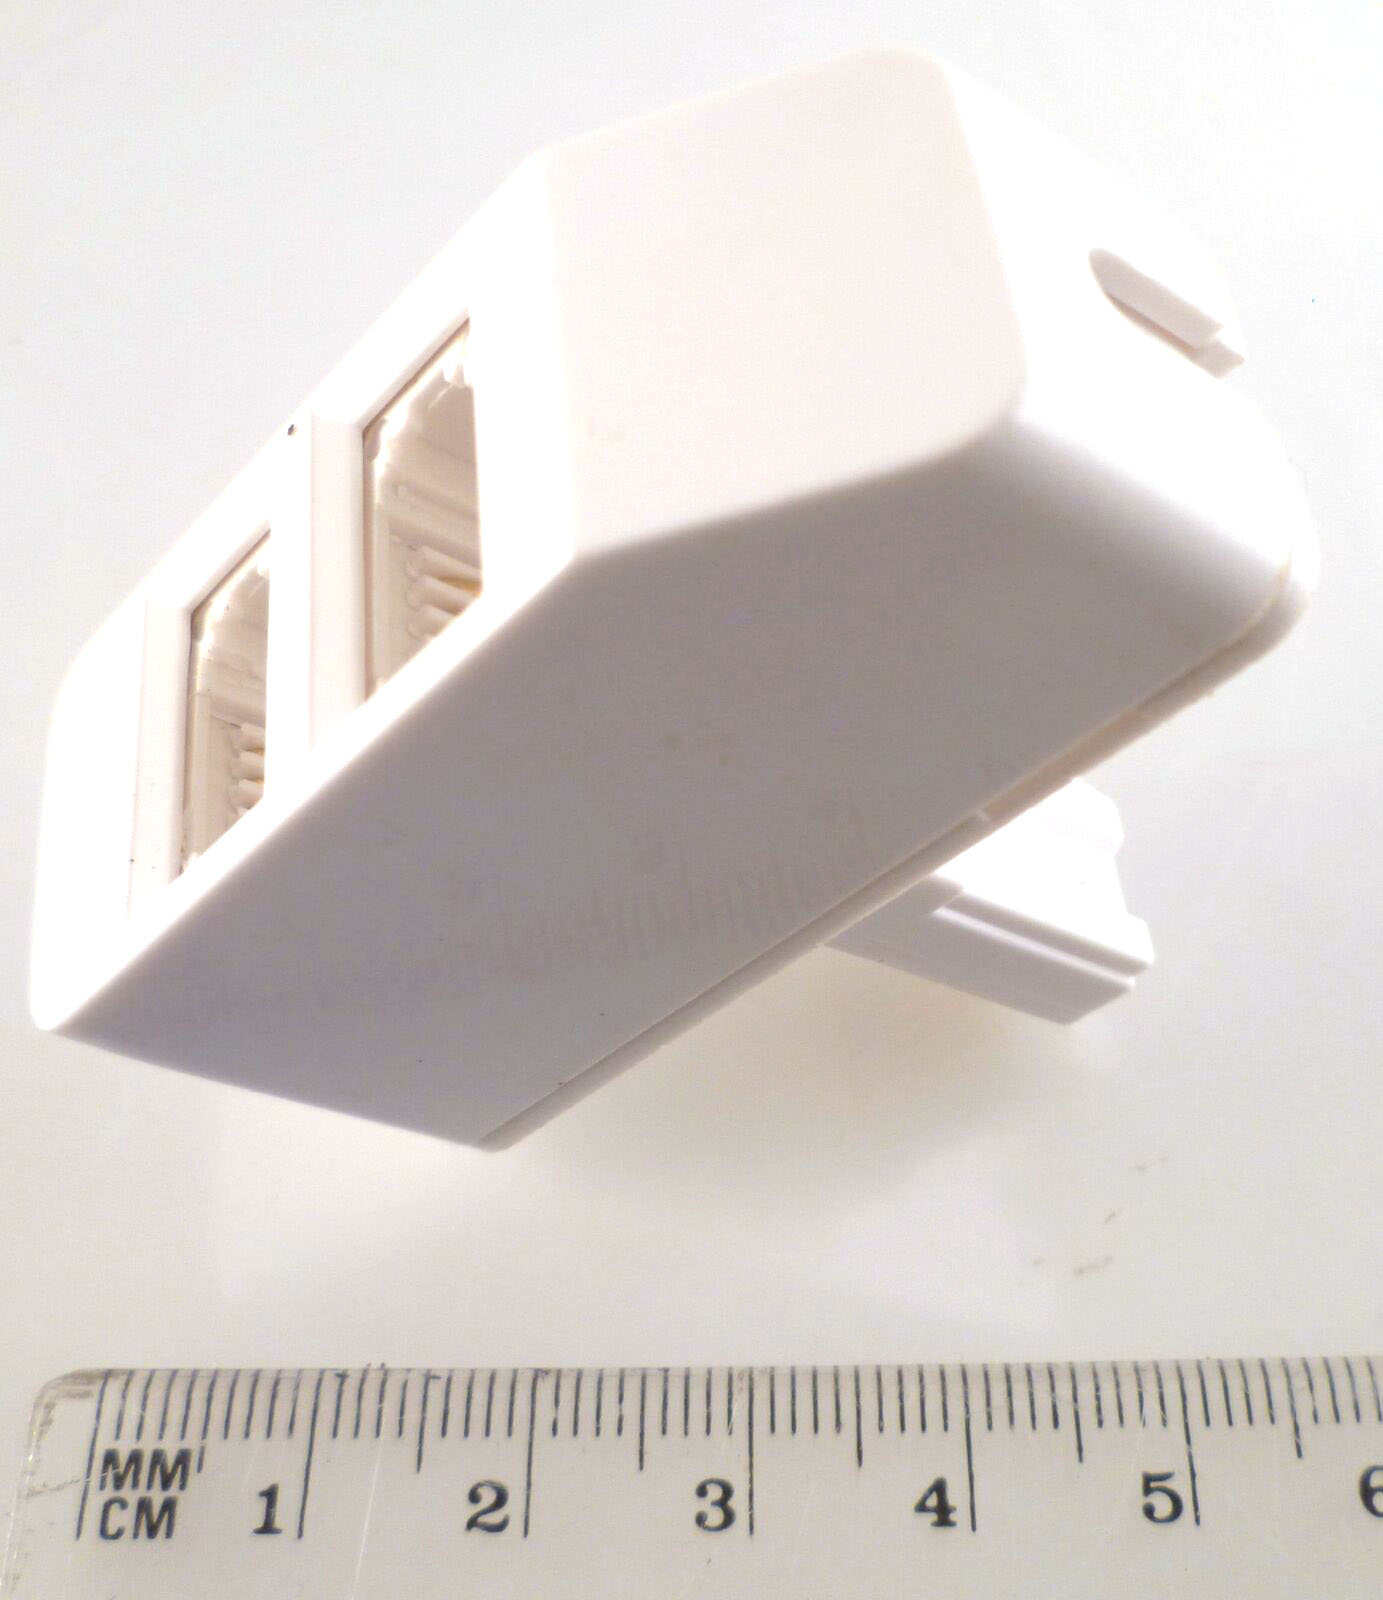 BT Plug to 2 Socket Adaptor Use to Add an Extension Etc. 2 Pieces